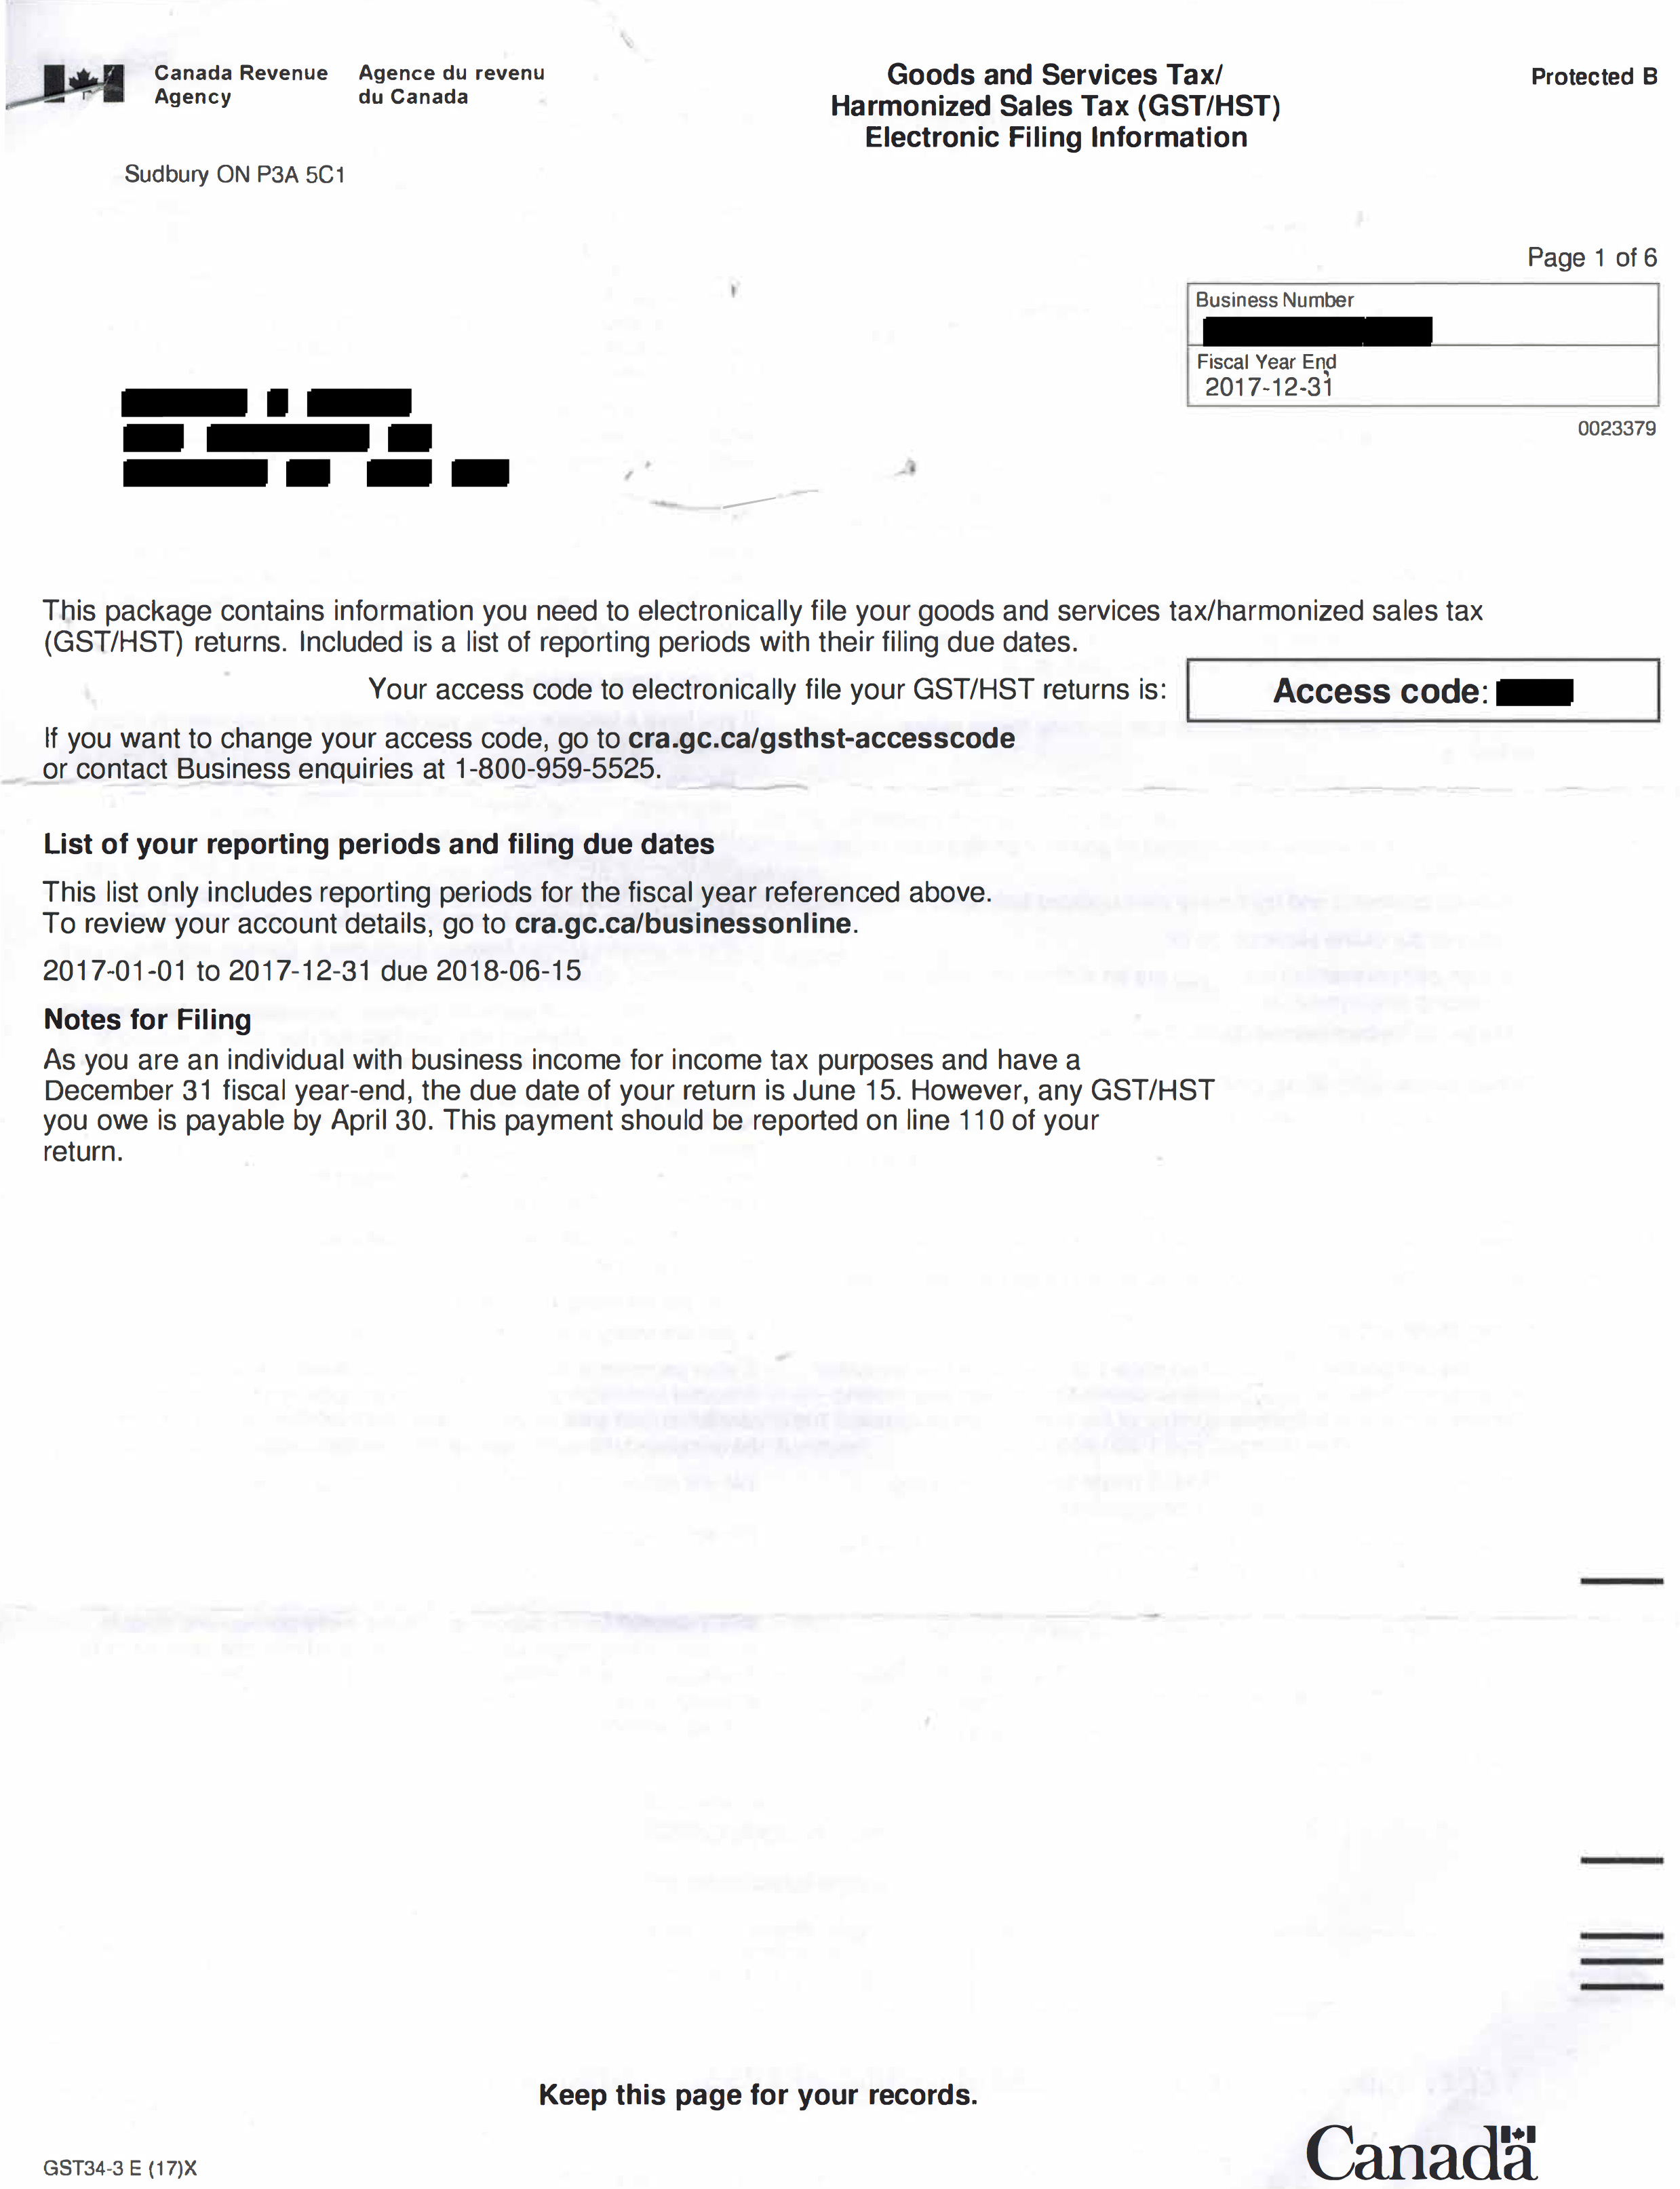 A redacted remittance request letter from the CRA